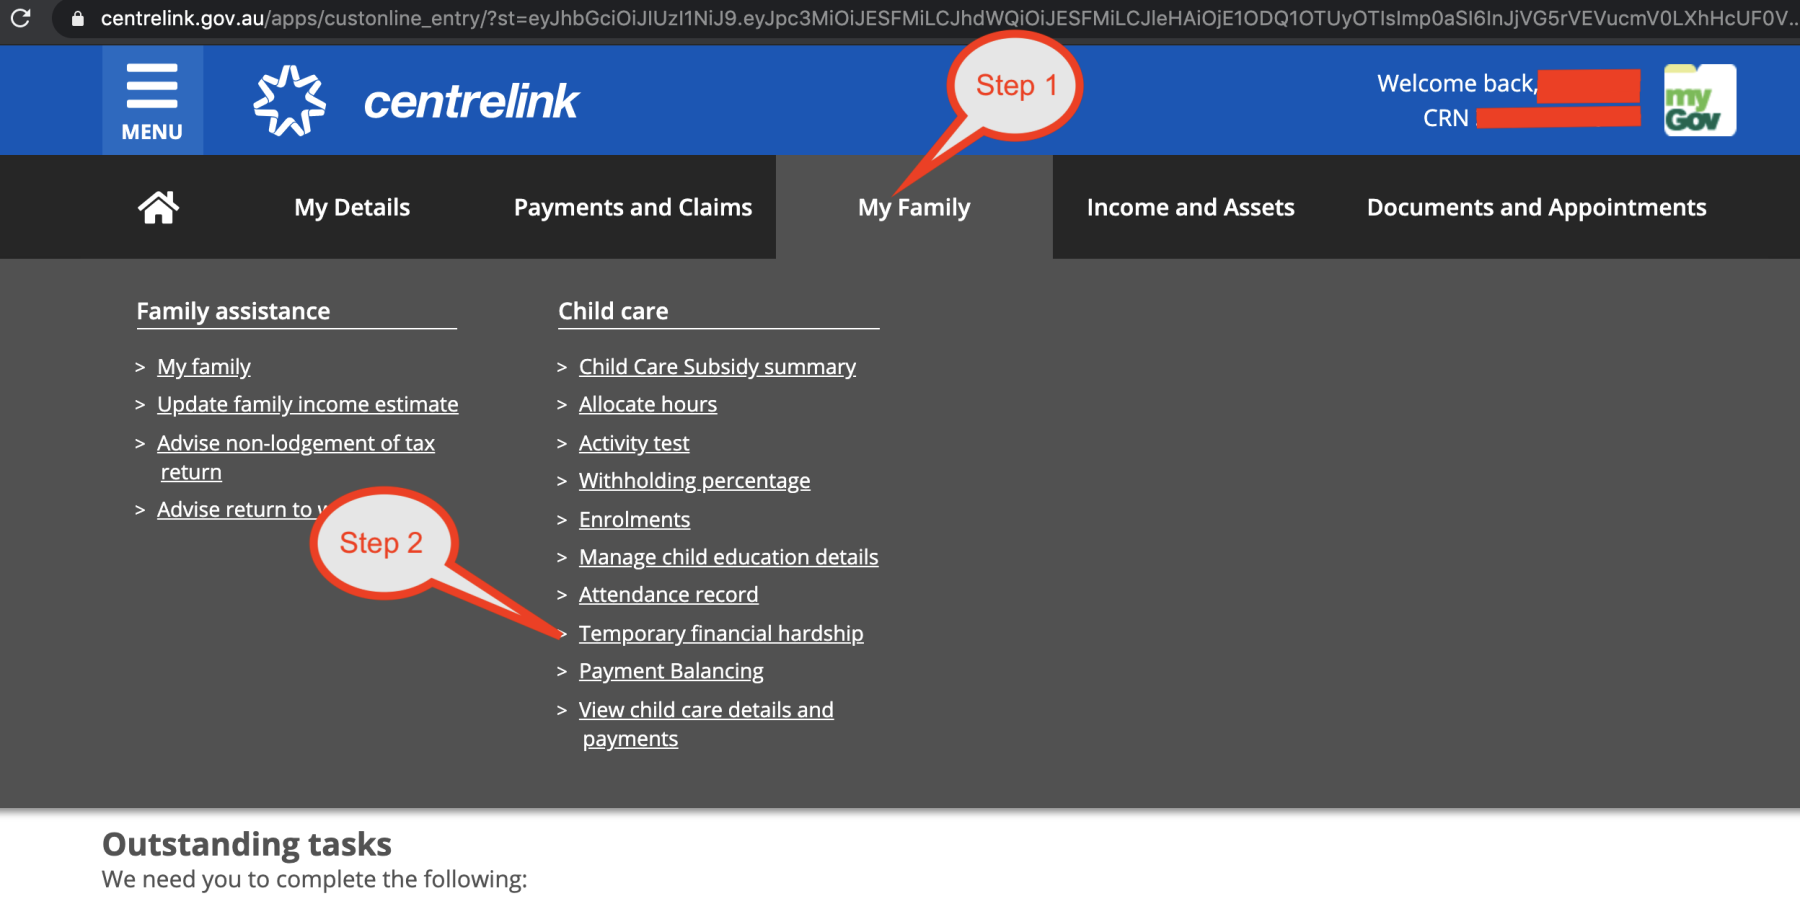 Screen shot from Centrelink online ACCS application